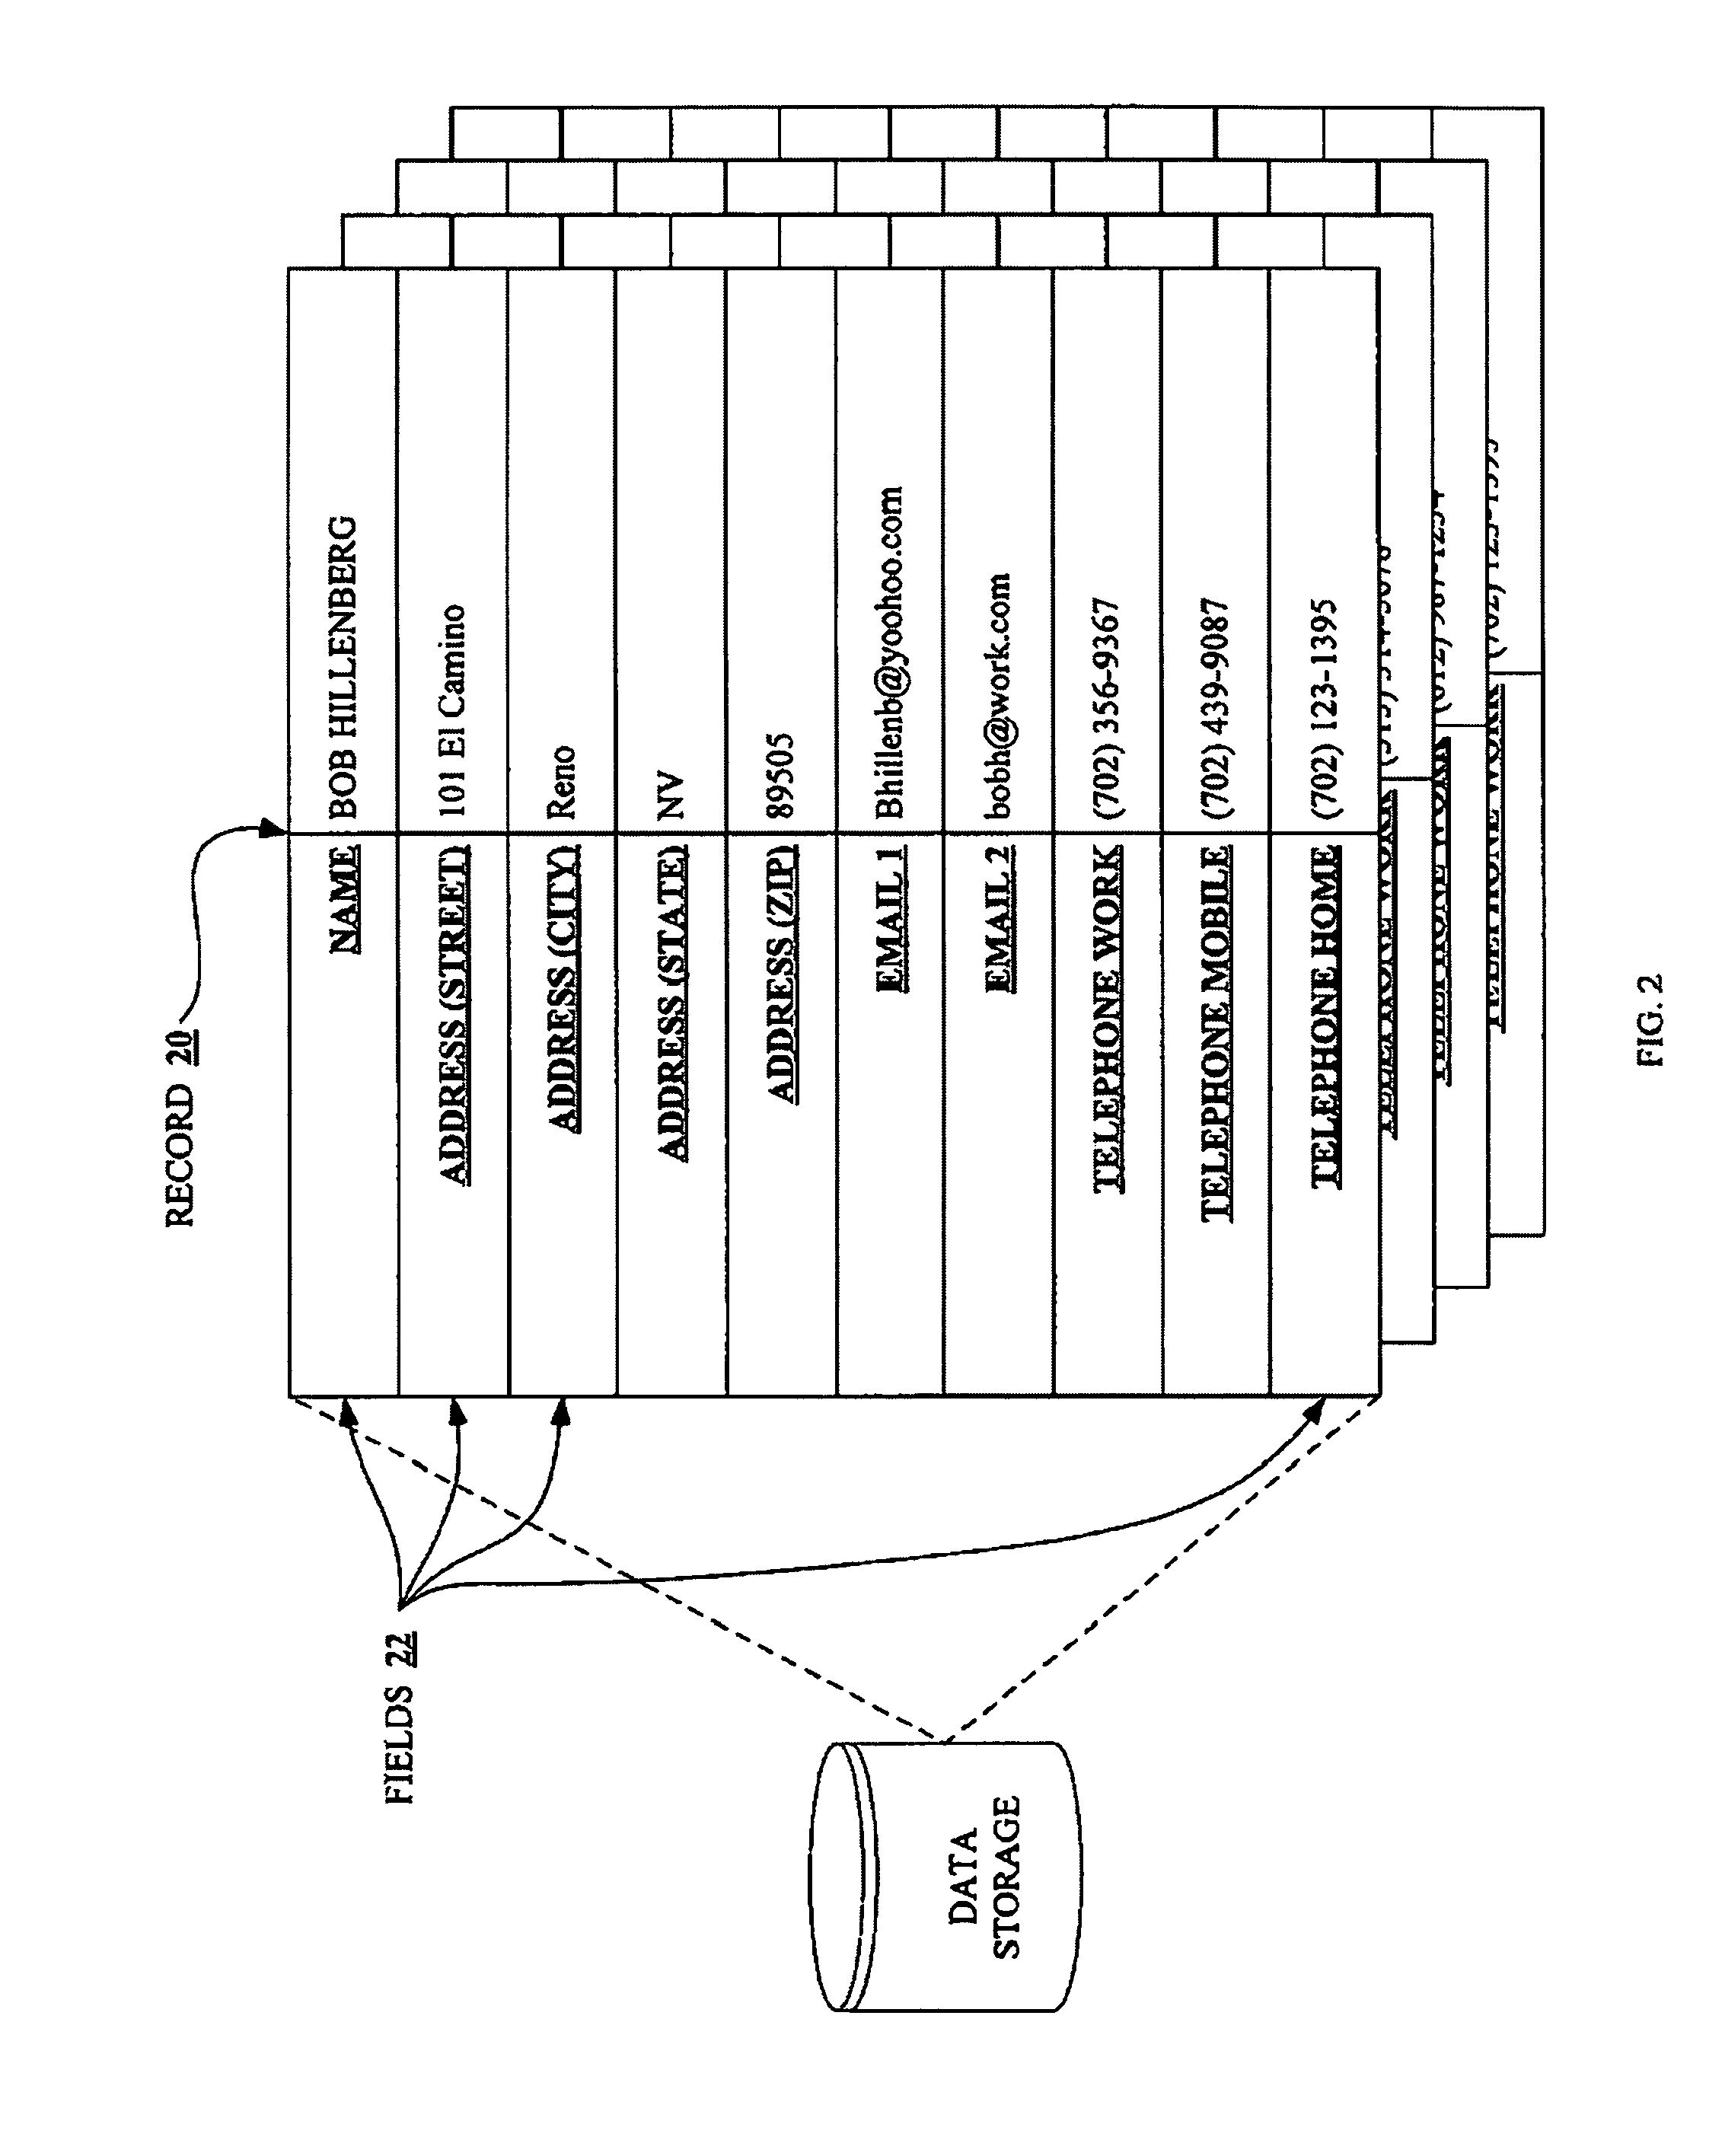 Method and apparatus for identifying and resolving conflicting data records